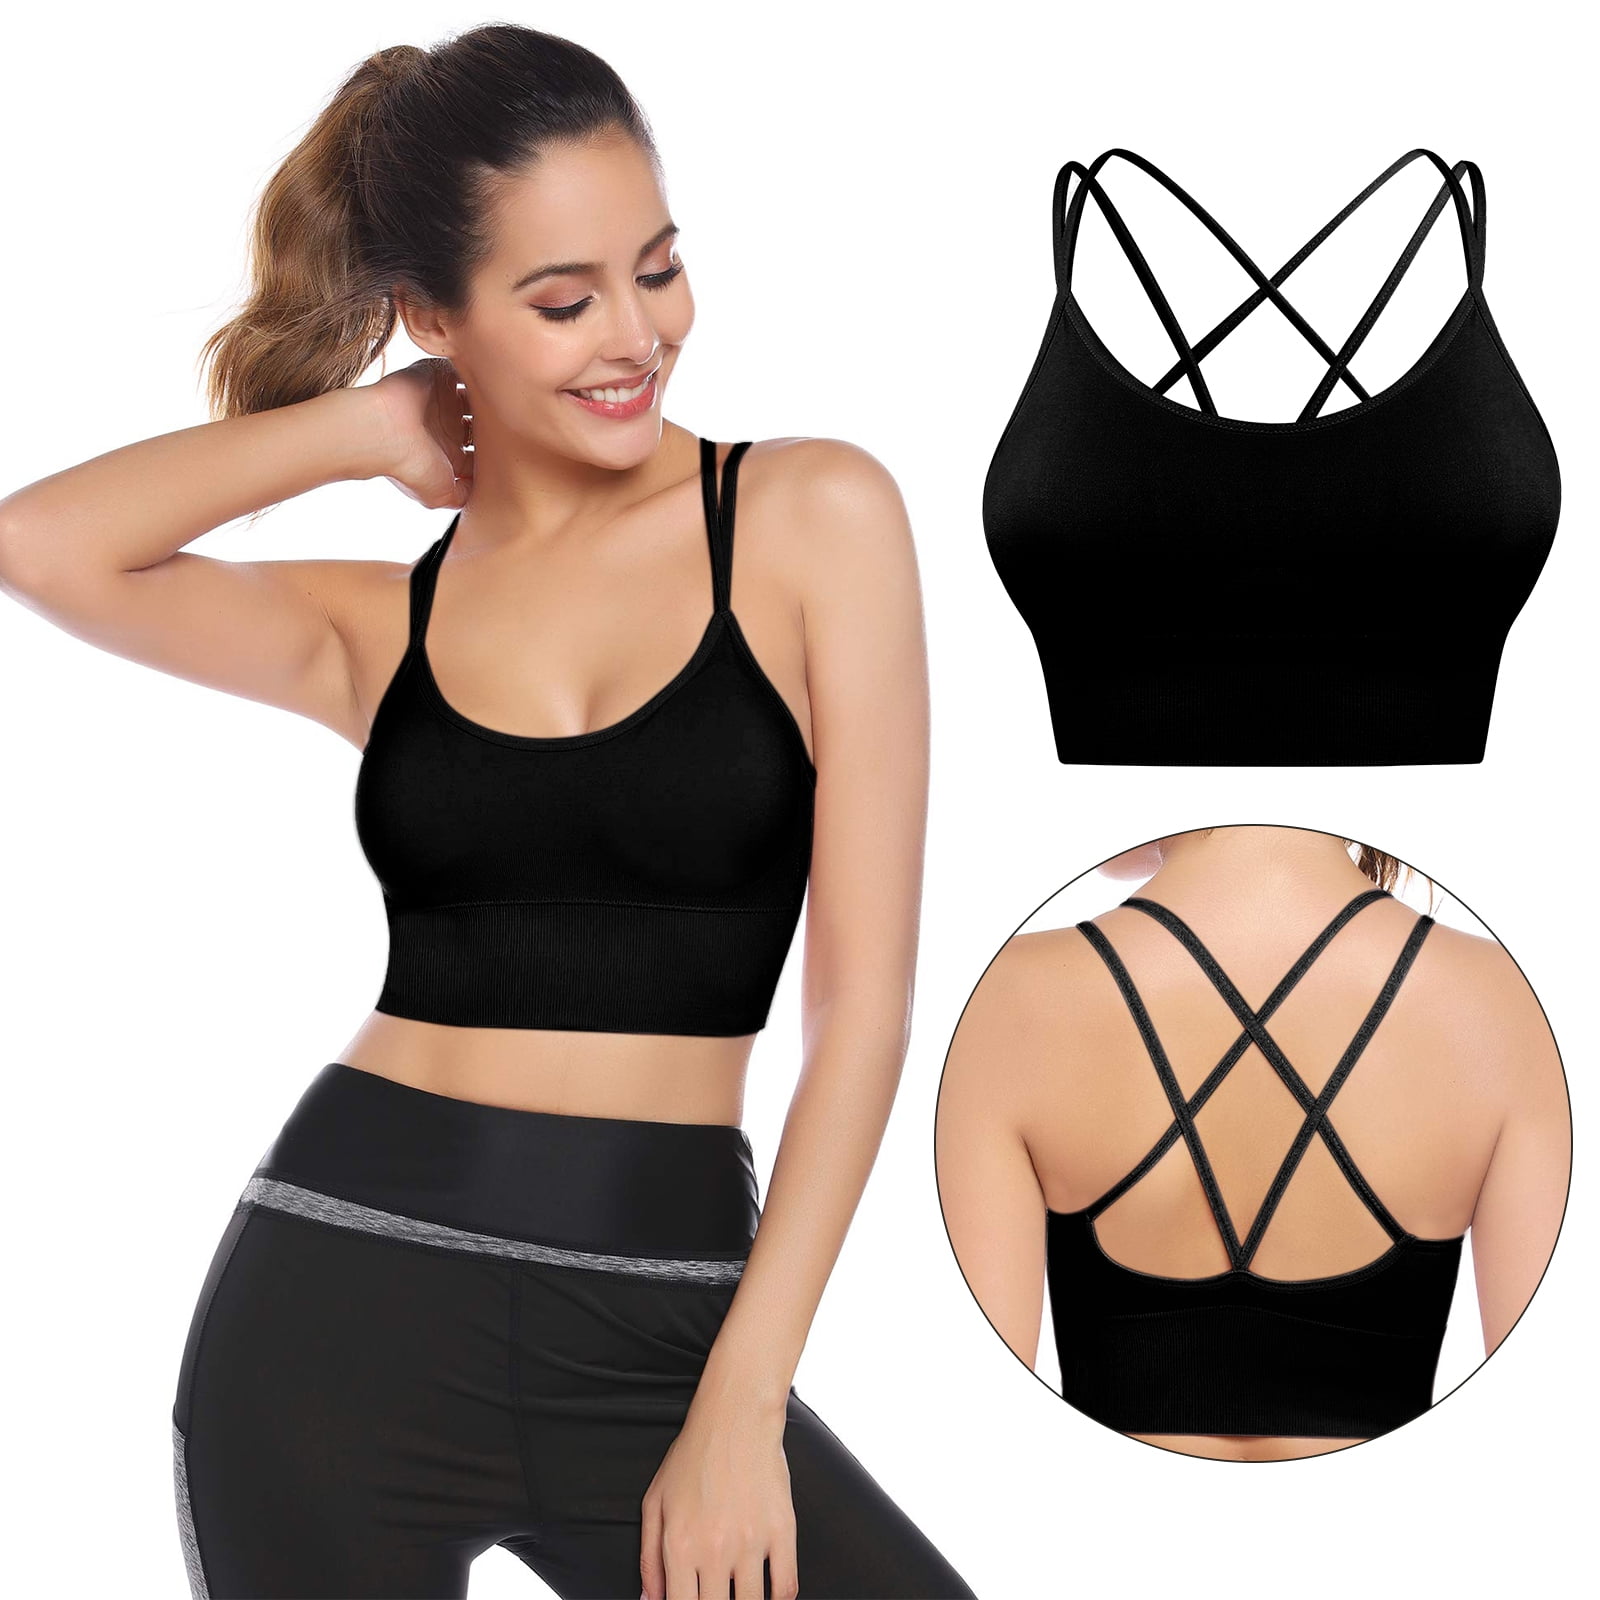 Women's Strappy Sports Bra with Pad, Sexy Crisscross Back Large Size  Support Yoga Bra for Workout Running Fitness Tank Tops, Black 